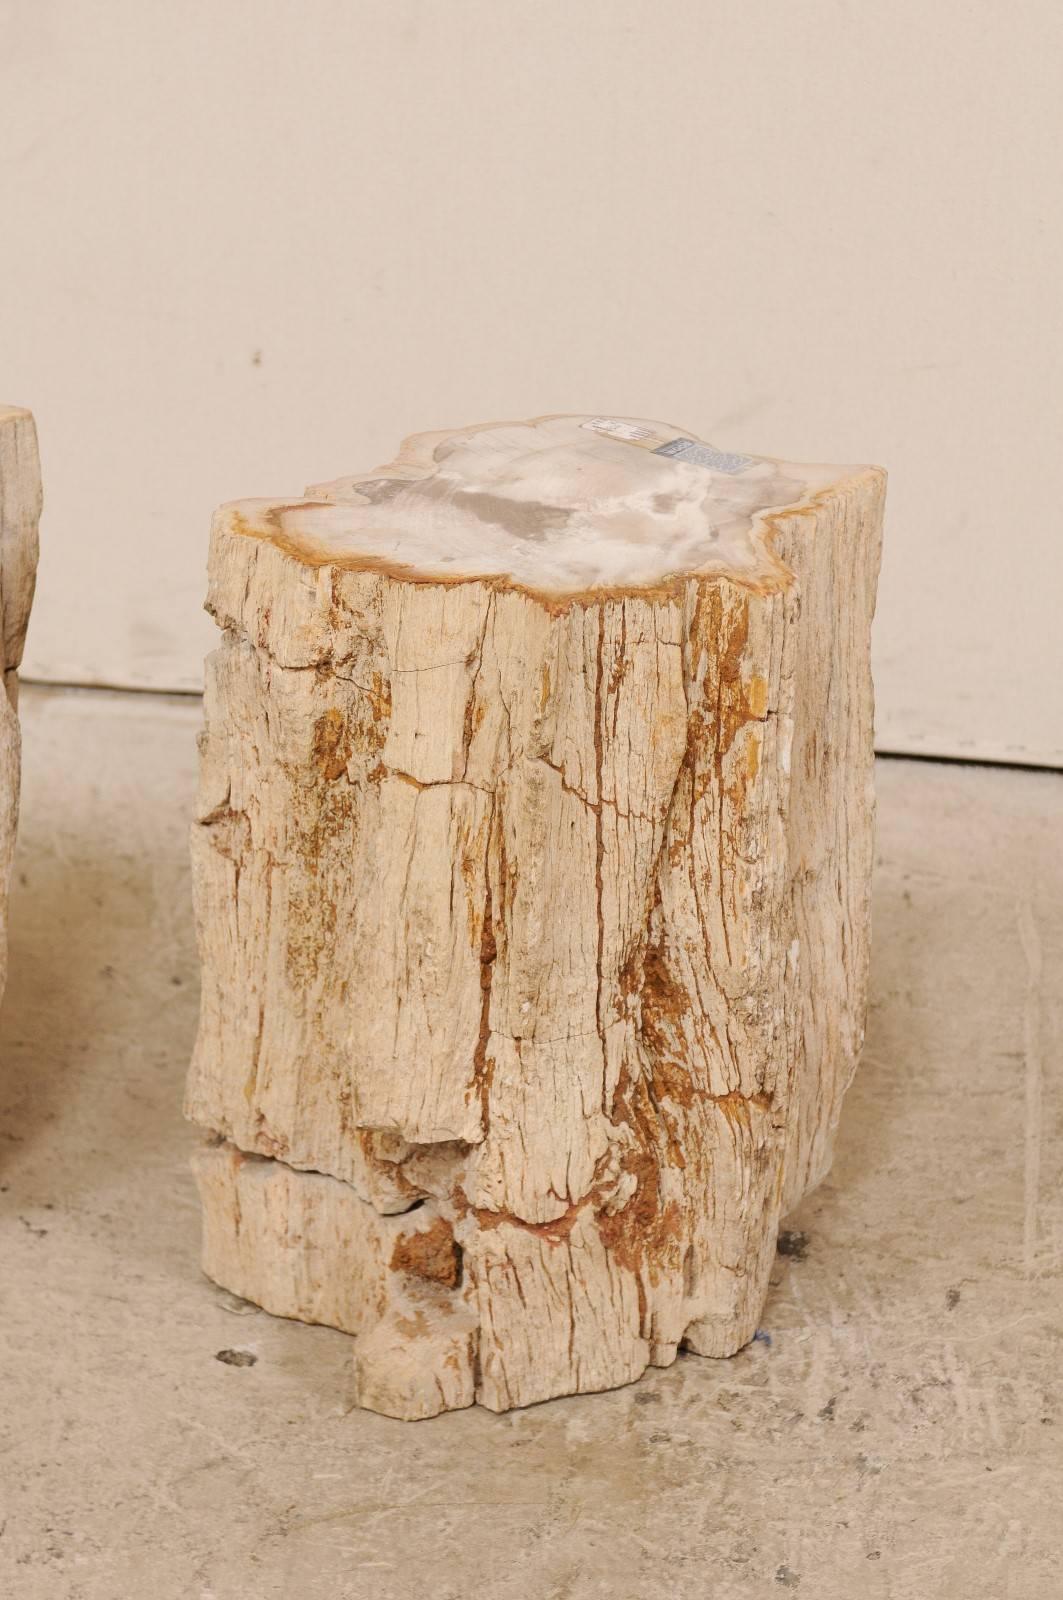 Indonesian Pair of Live-Edge Petrified Wood Drink Tables With Polished Tops, Light Colored